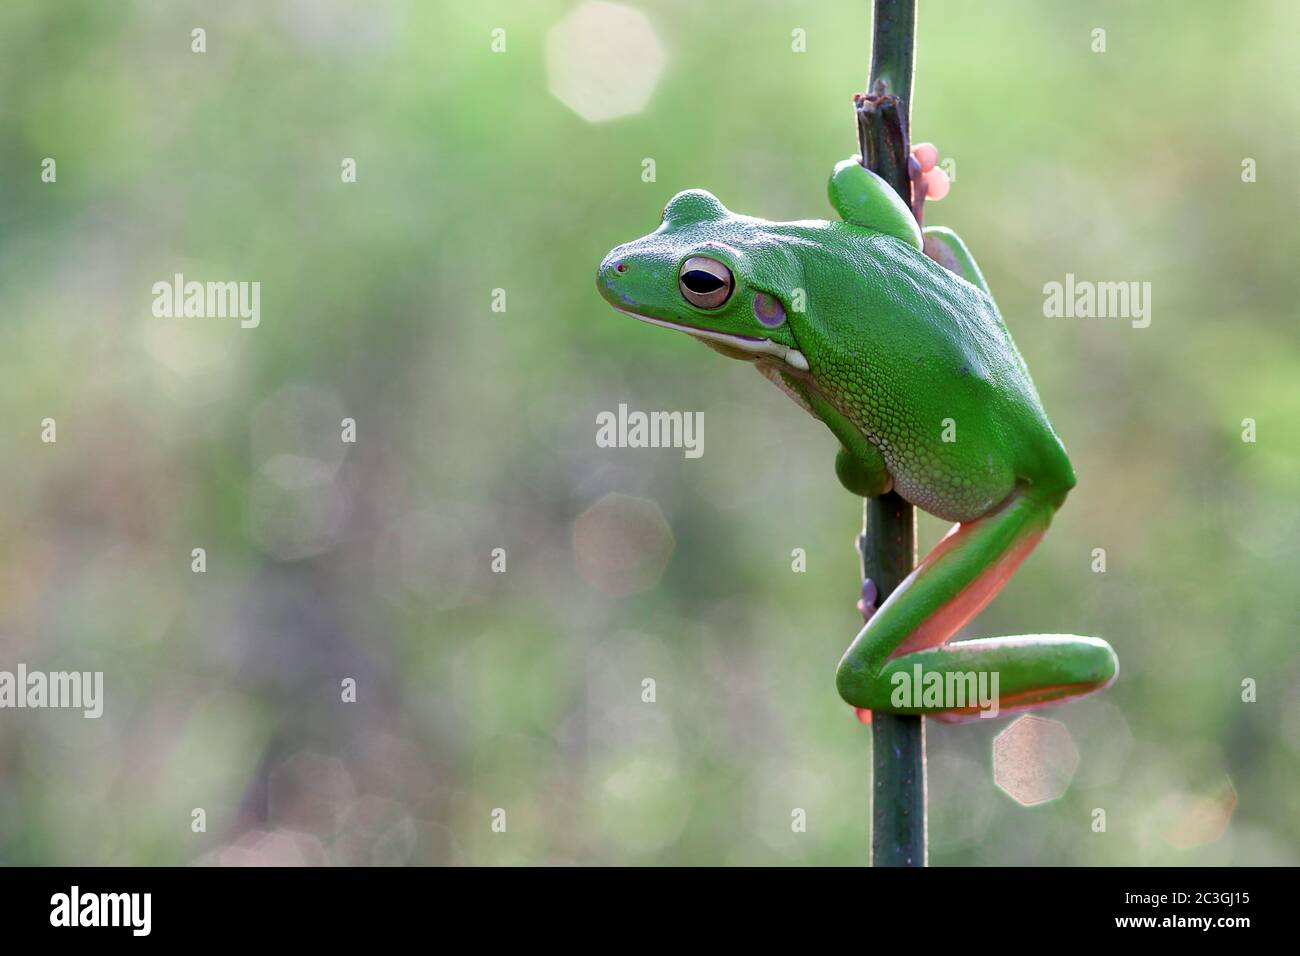 frogs, tree frogs, dumpy frogs in tree branches or flowers Stock Photo